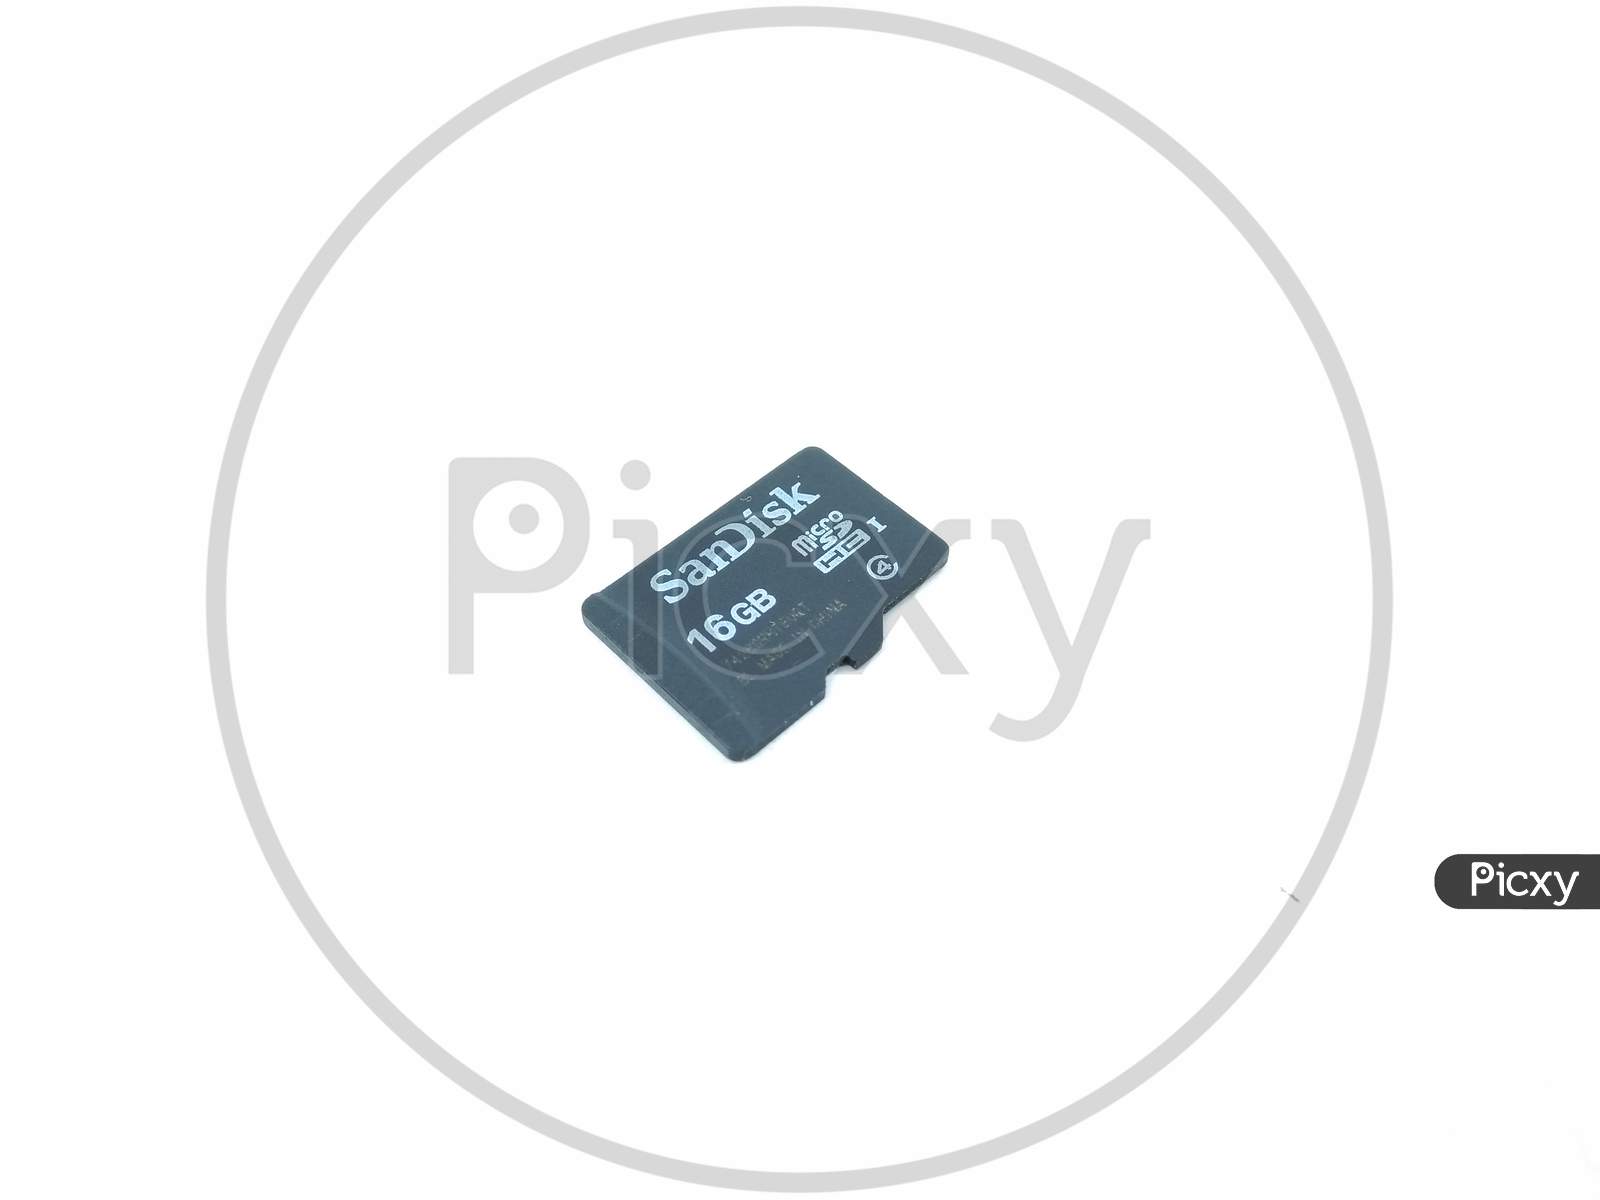 Micro SD Memory Card On White Background